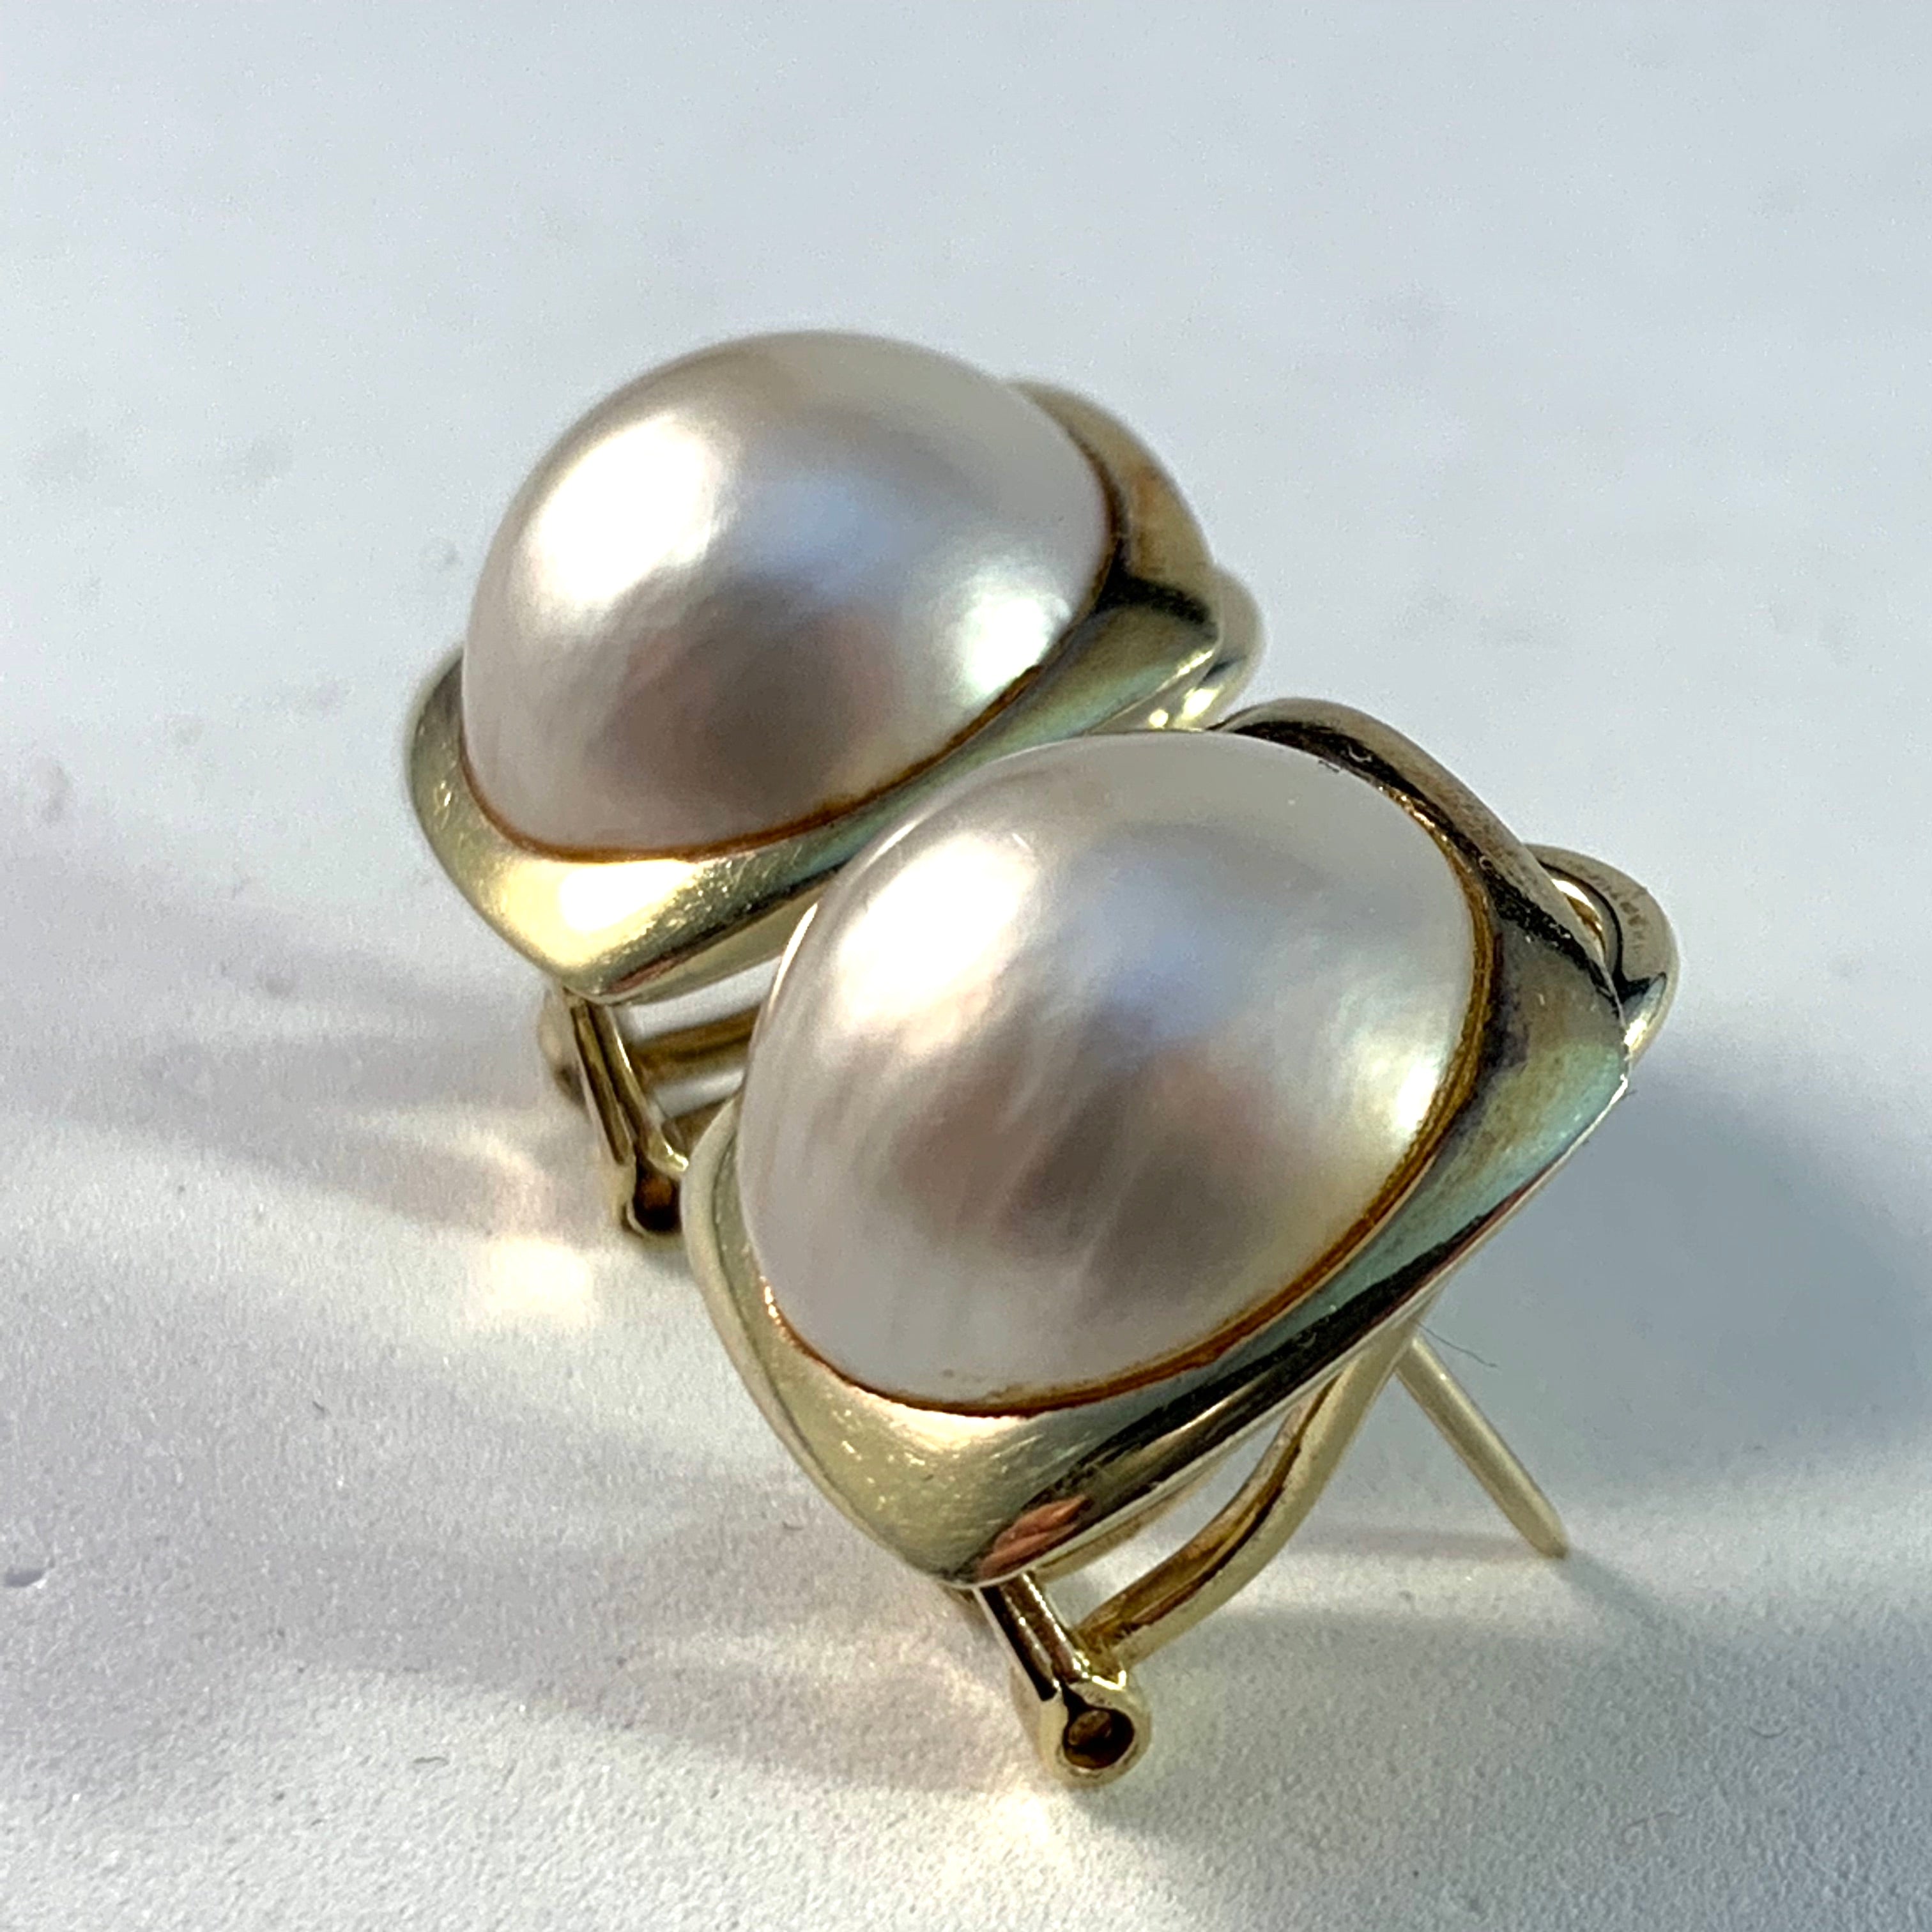 Mid Century 14k Gold Large Mabe Pearl Earrings.